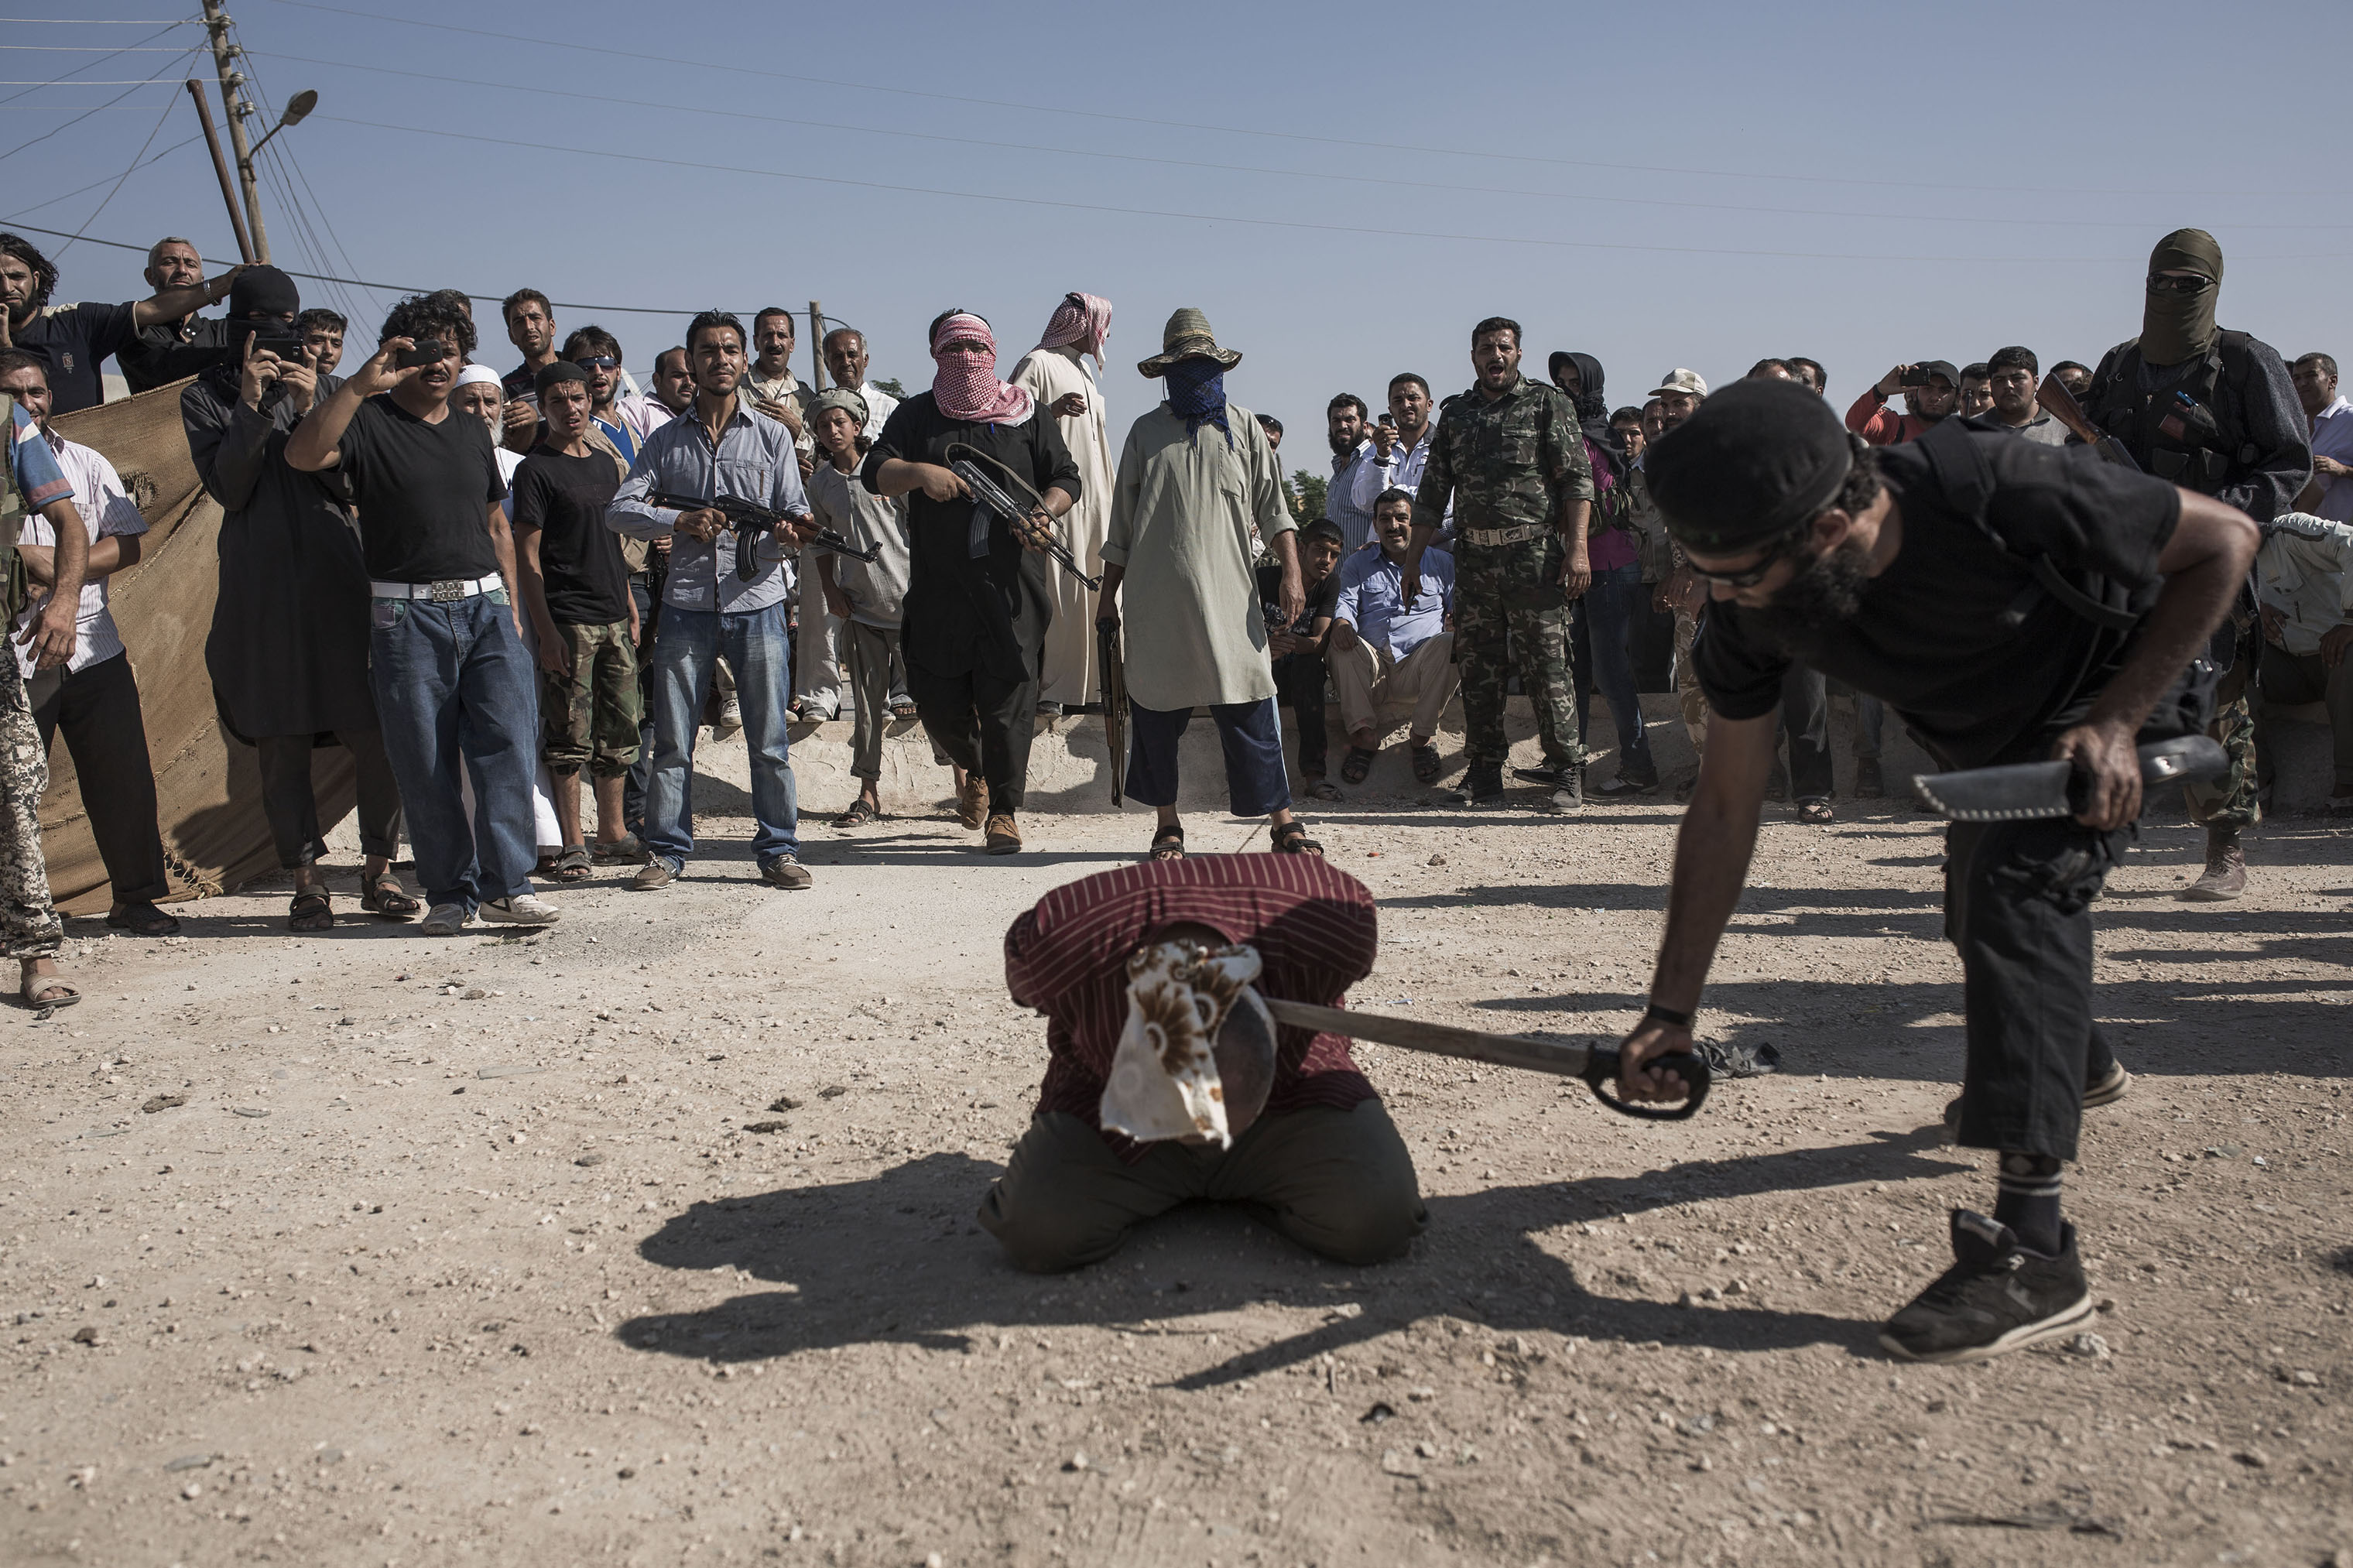 A soldier from Assad's regime—charged with being an informant, murder, stealing and delivering 10 Free Syrian Army soldiers to the regime—is executed by ISIS in the town of Ehtemlat in northern Syria, 2013. (Emin Özmen—Magnum Photos)